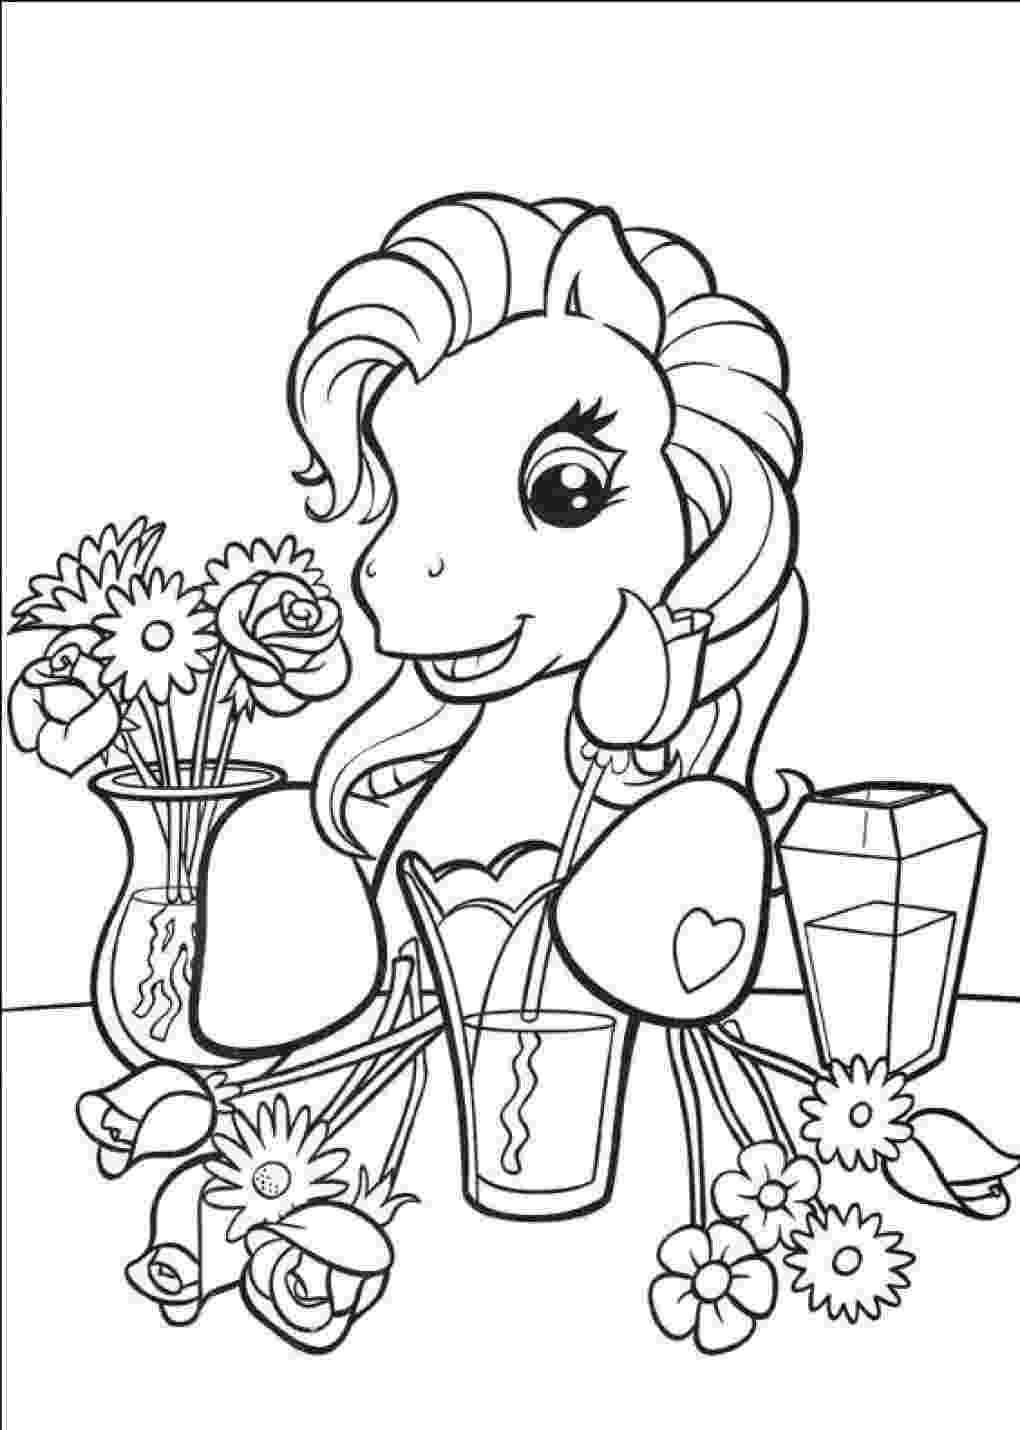 my little pony picters 20 my little pony coloring pages your kid will love little picters pony my 